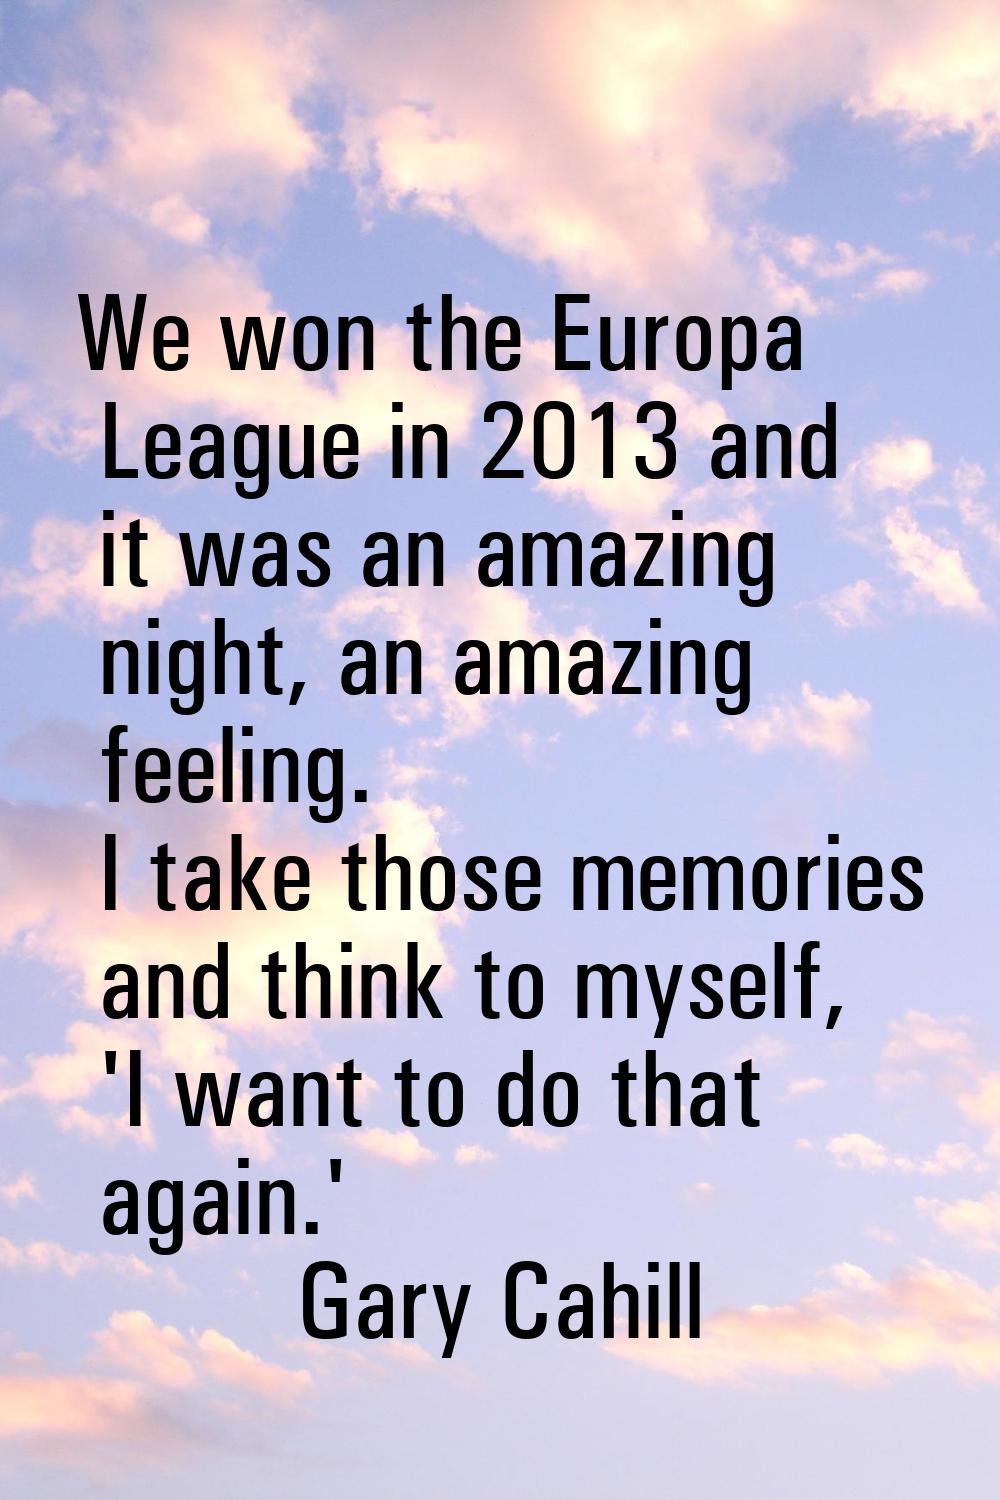 We won the Europa League in 2013 and it was an amazing night, an amazing feeling. I take those memo